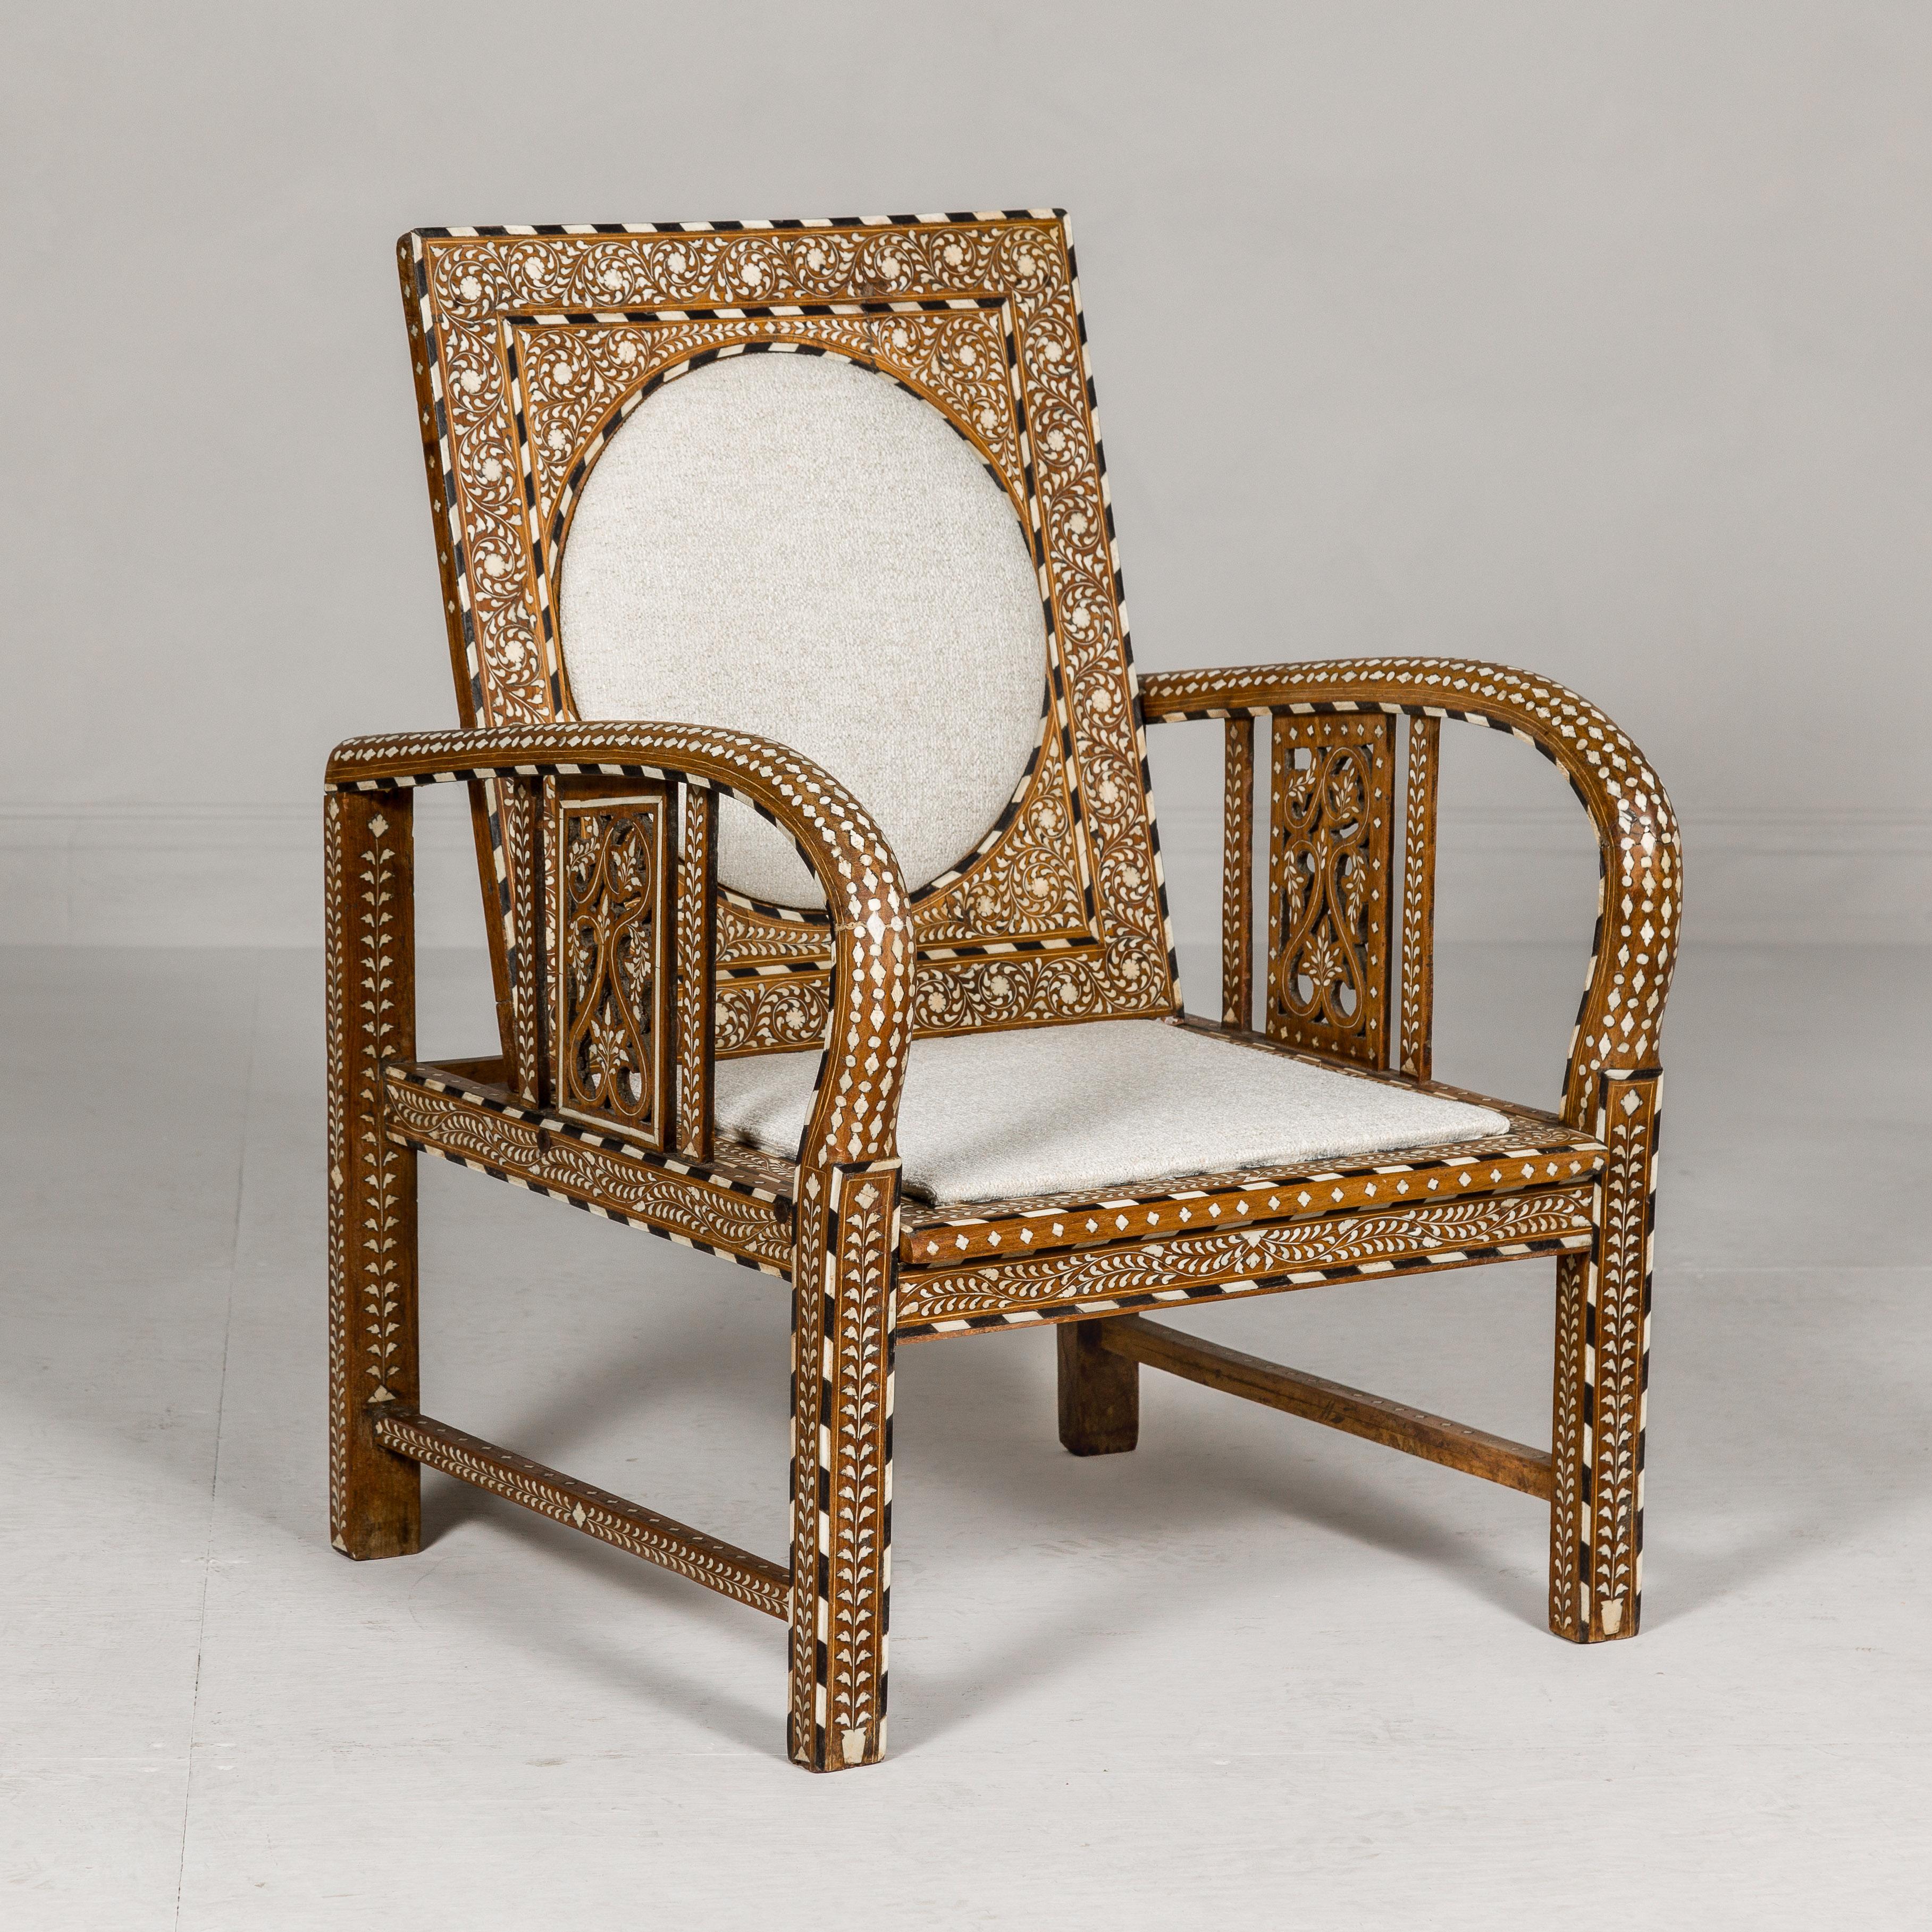 An Anglo-Indian style mango wood armchair with scrolling foliage bone inlay, loop arms and custom upholstery. This Anglo-Indian style mango wood armchair is a true masterpiece, a blend of exquisite craftsmanship and opulent design. Adorned with